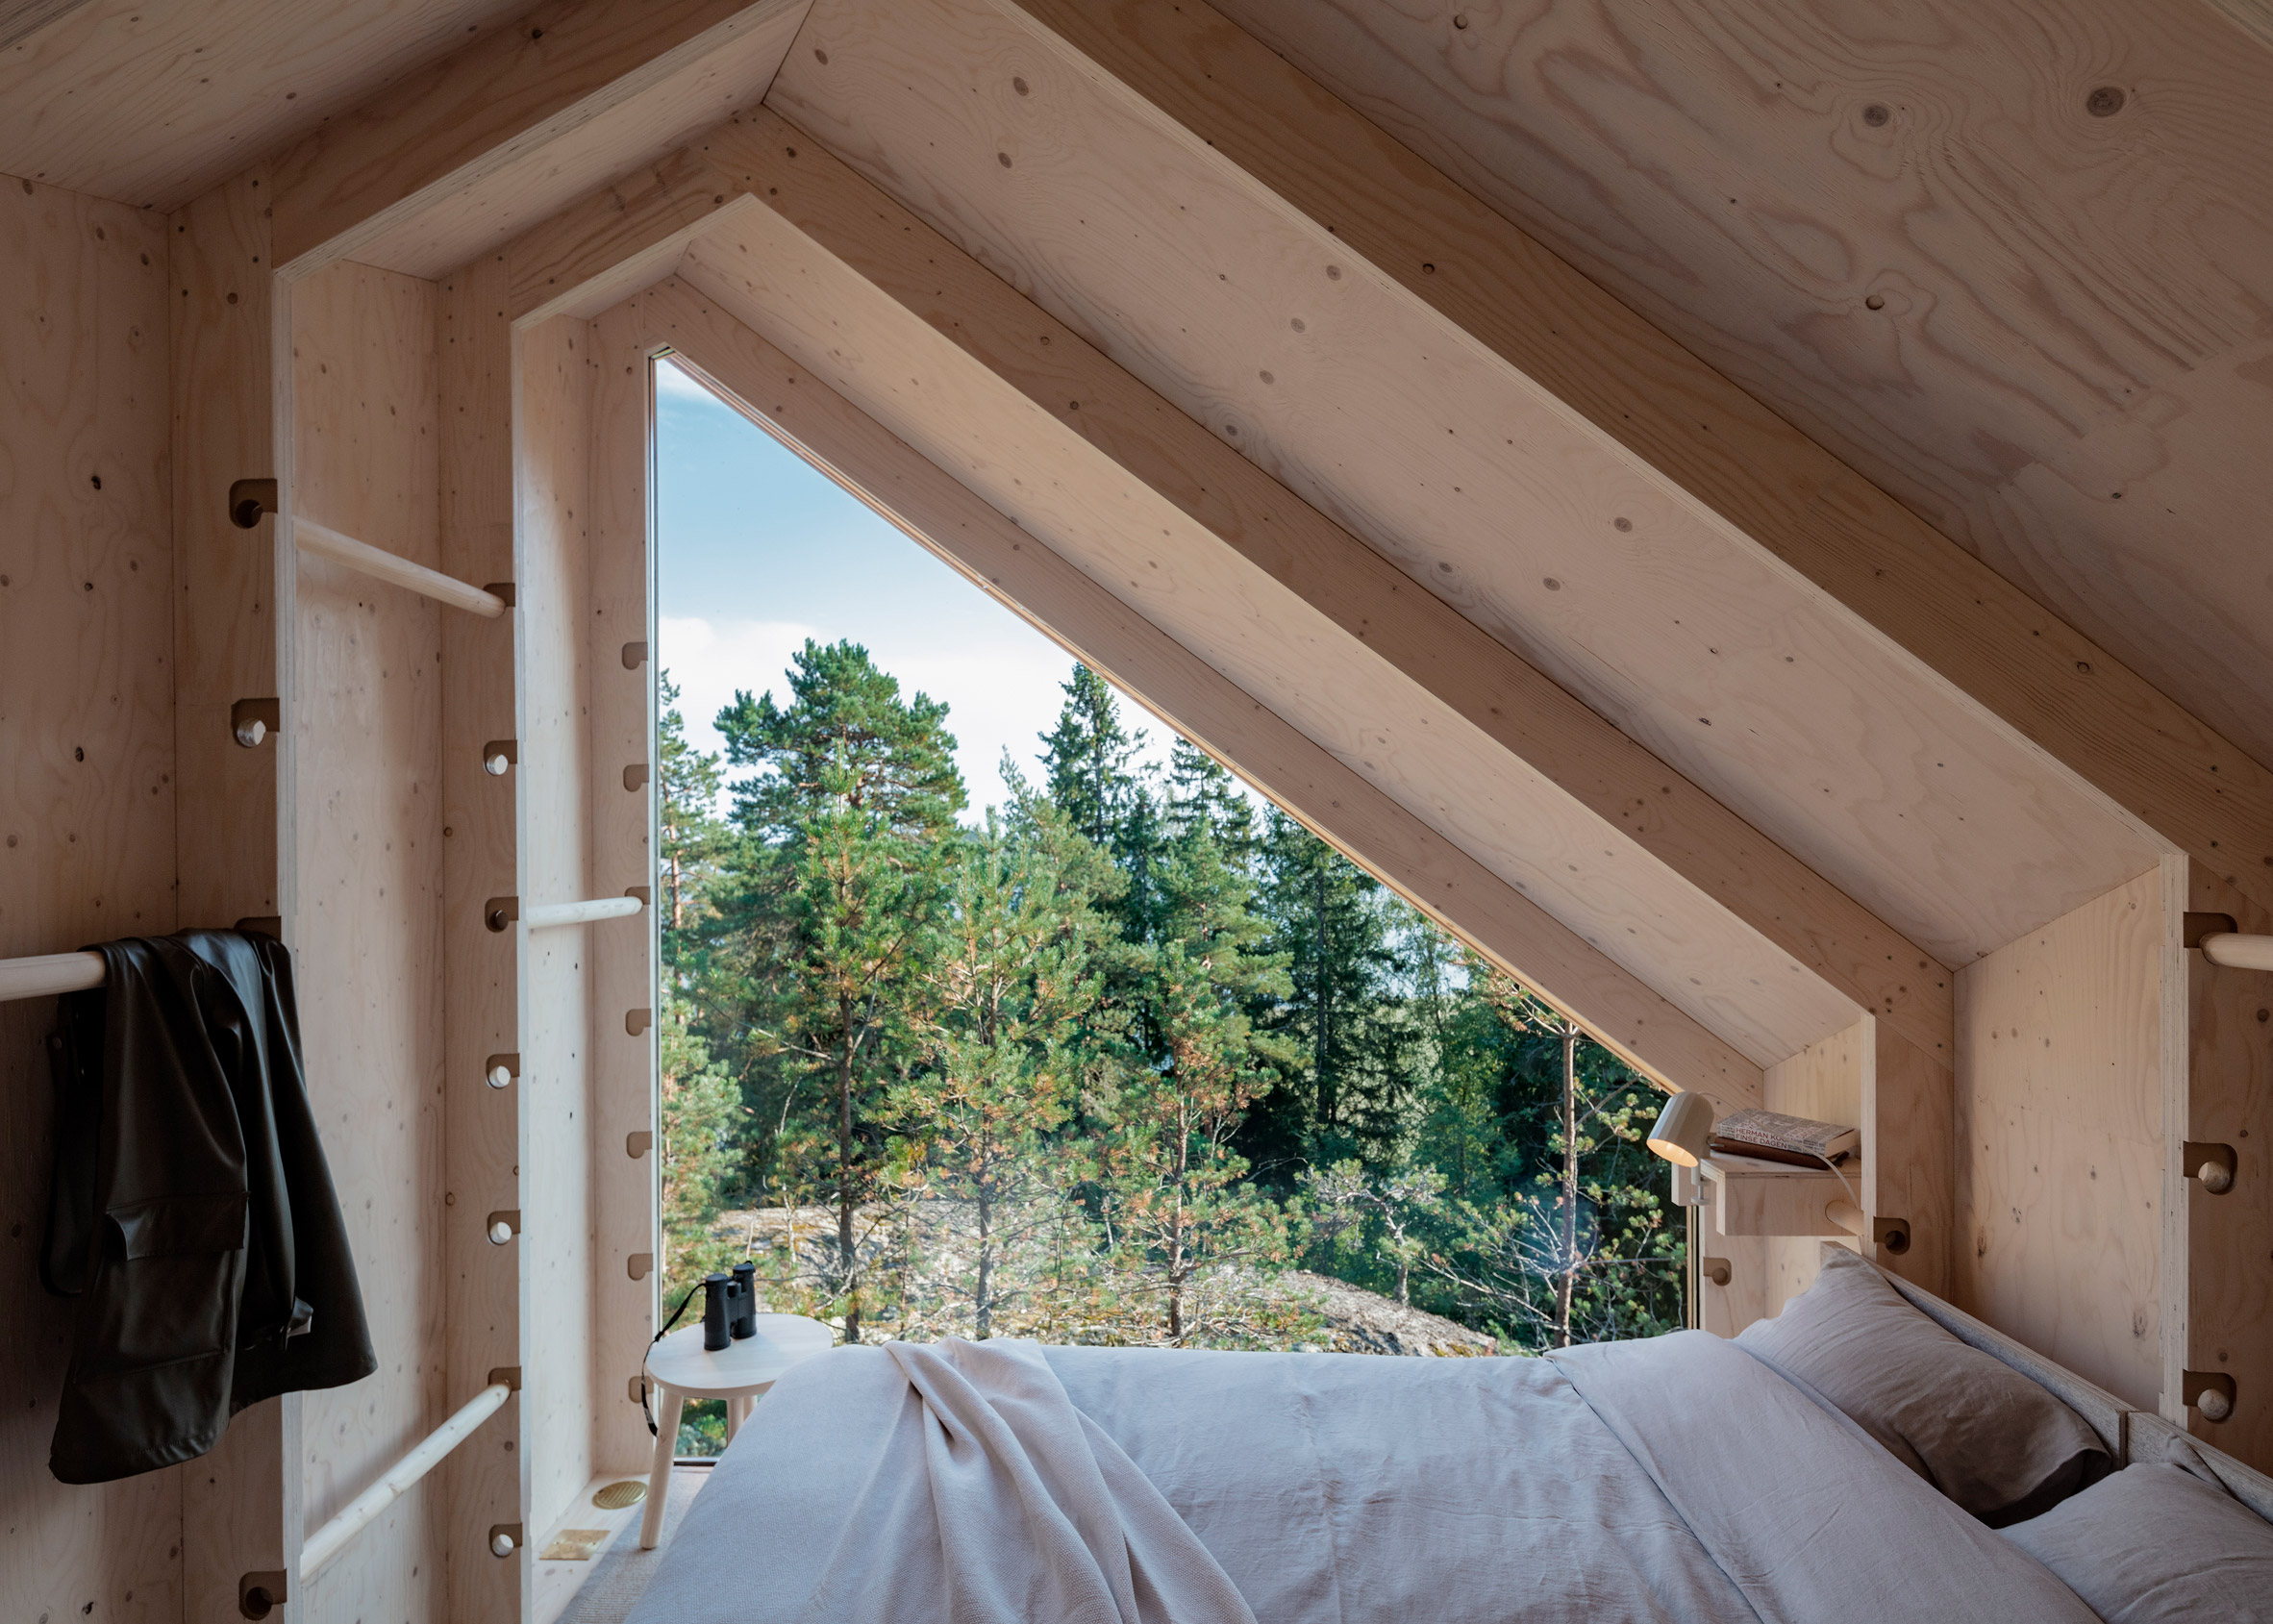 Inside the modular Space of Mind cabin prototype by Studio Puisto